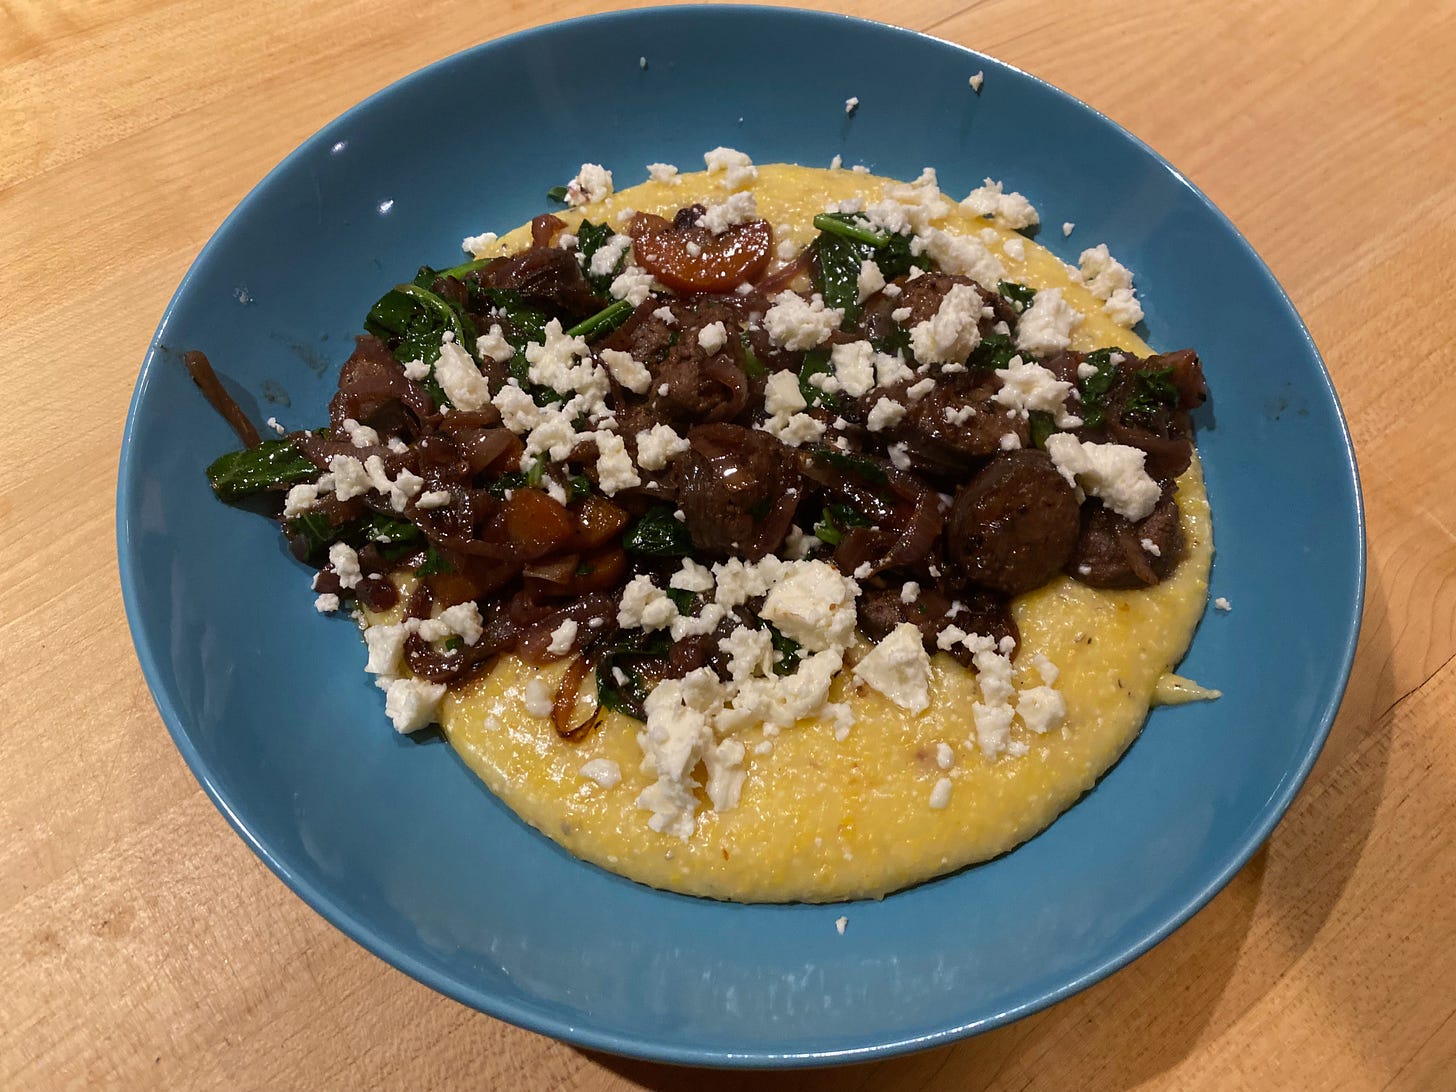 A wide blue bowl full of creamy polenta topped with kale, pieces of sausage, carrots, and crumbled feta cheese.